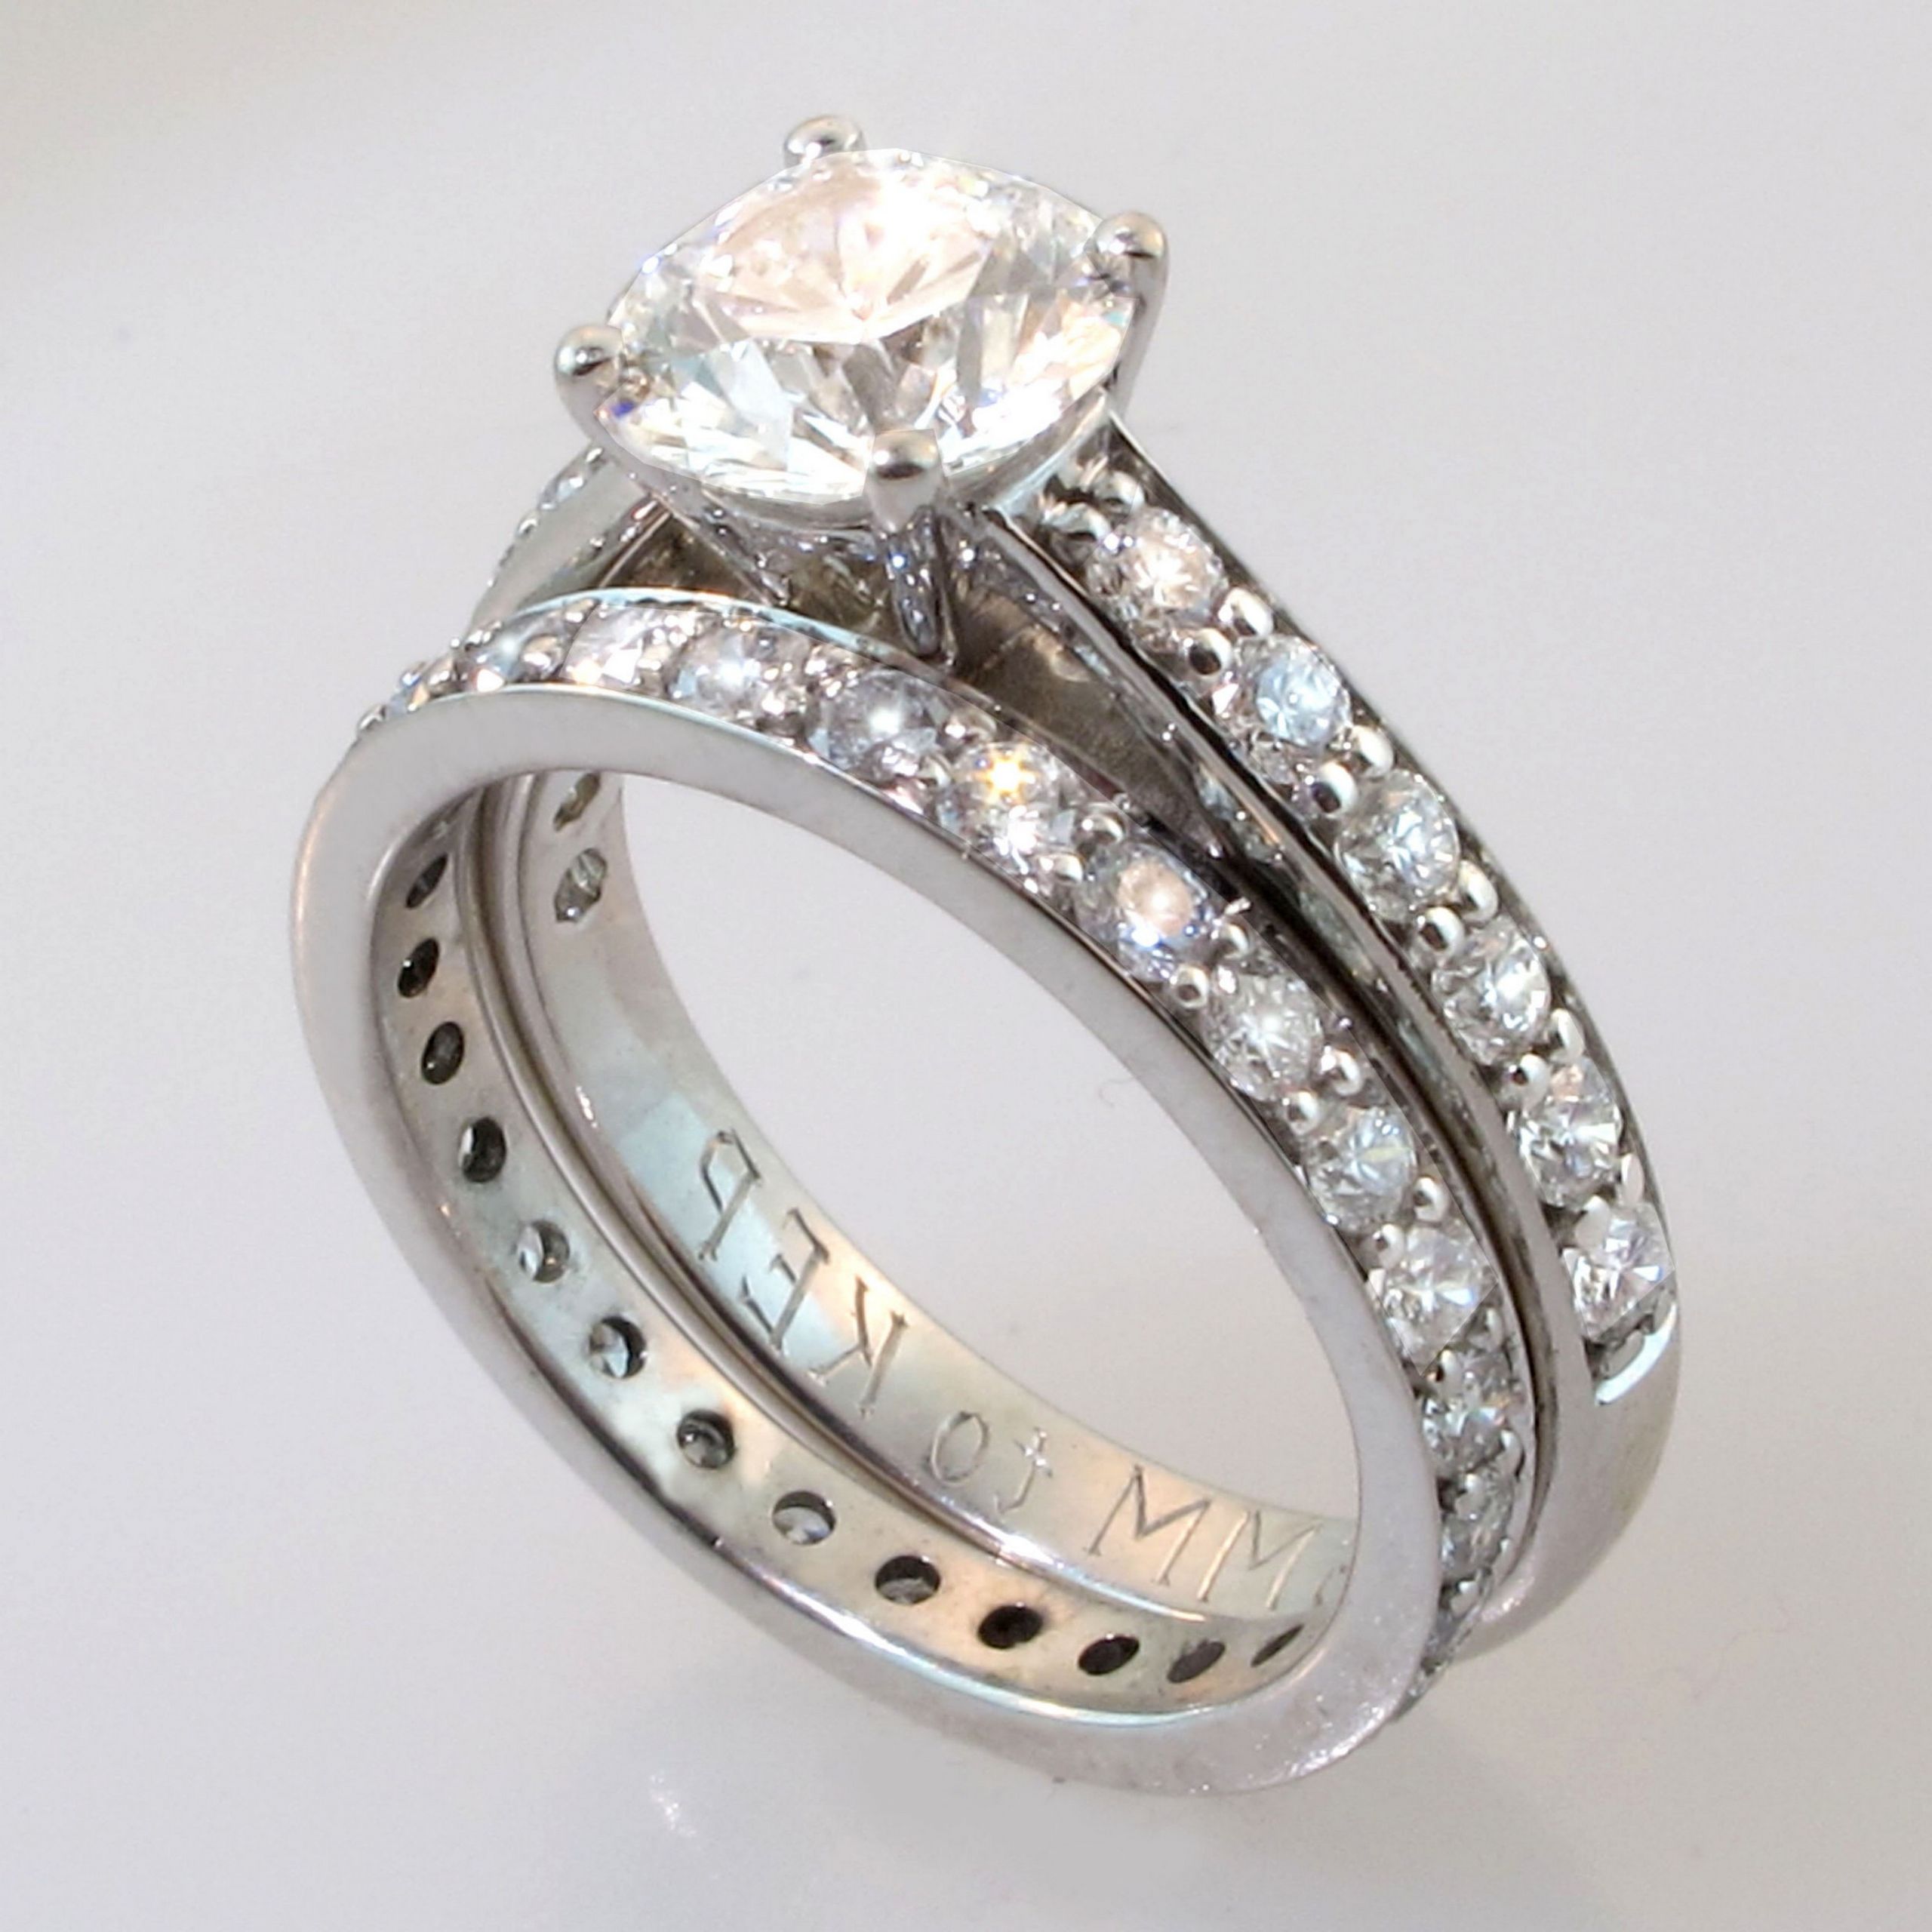 Discount Wedding Rings
 Why Should Make Wedding Ring Sets For Women and Also Men